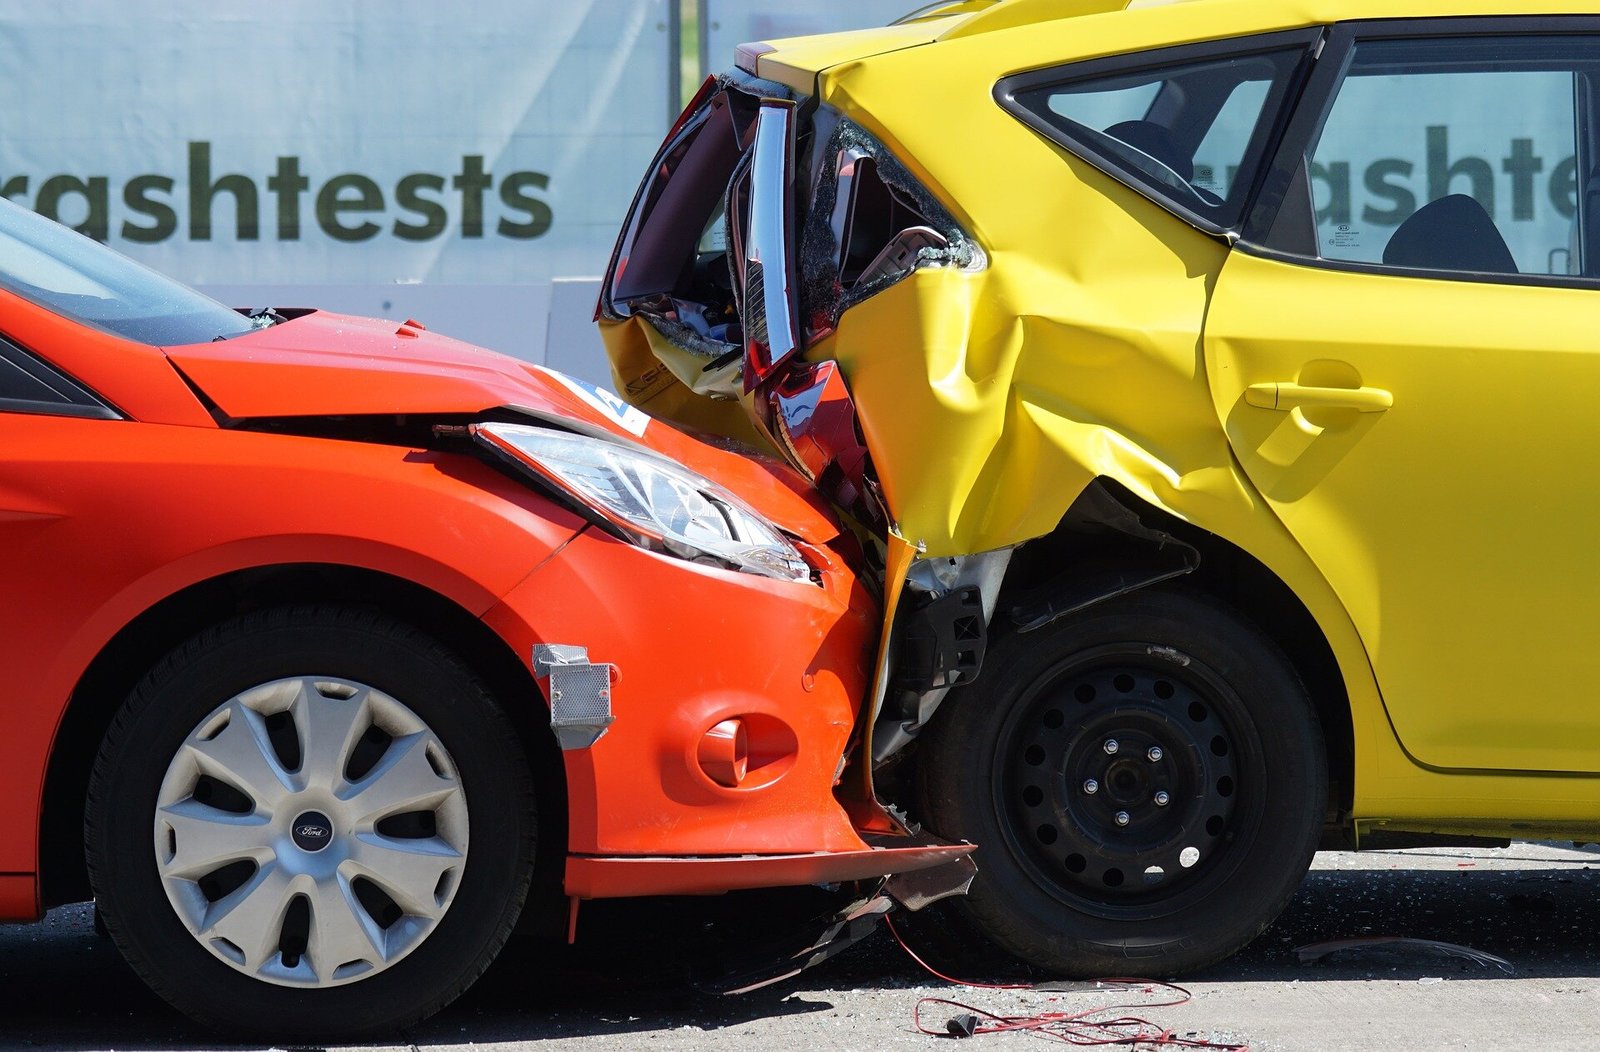 Women involved in car crashes may be more likely to go into shock than men